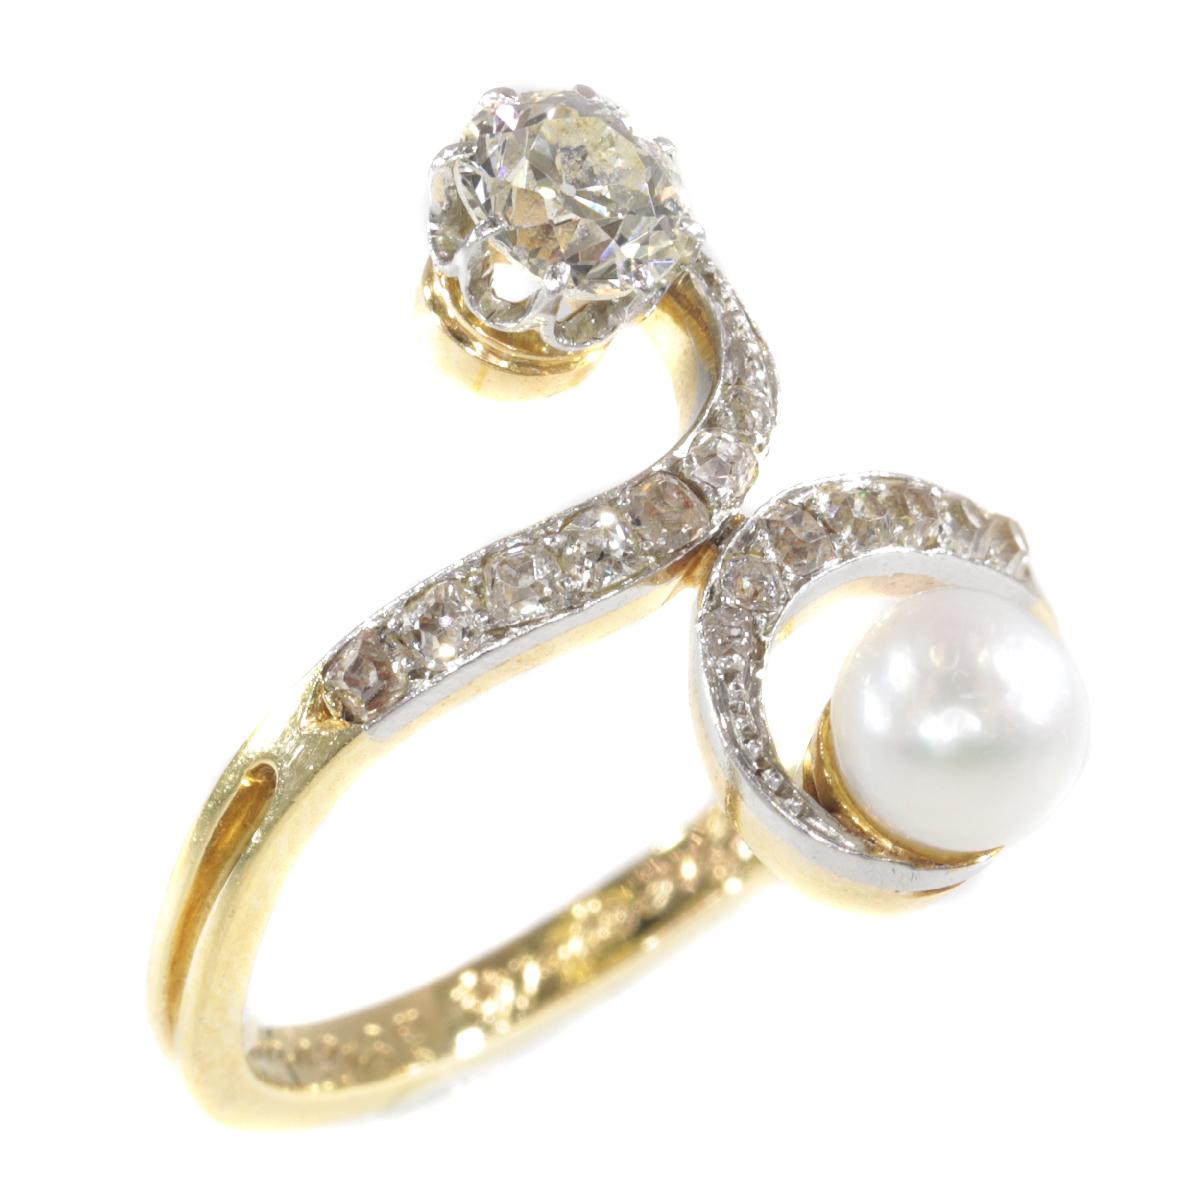 Elegant Belle Epoque Diamond and Pearl Engagement Ring so Called Toi et Moi For Sale 2